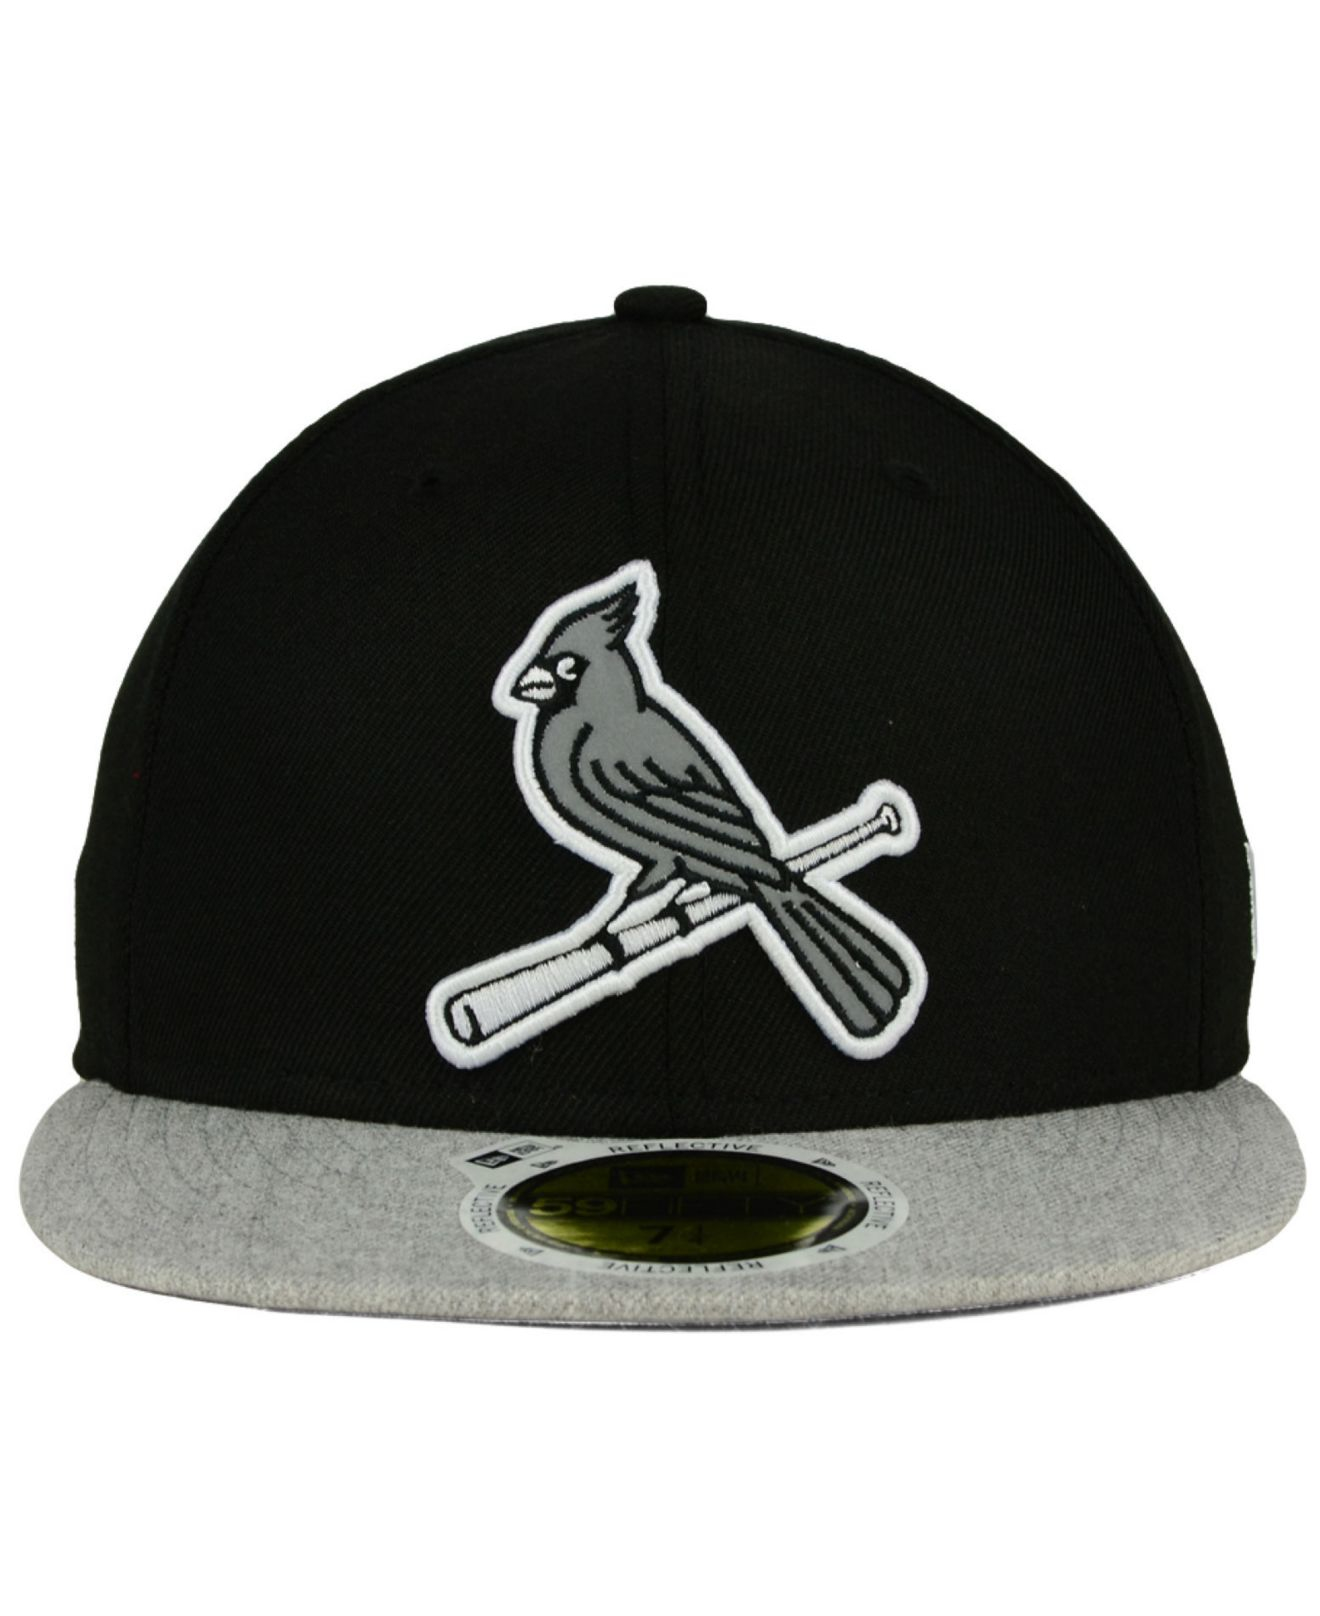 KTZ St. Louis Cardinals Mlb Black And White Fashion 59fifty Cap for Men